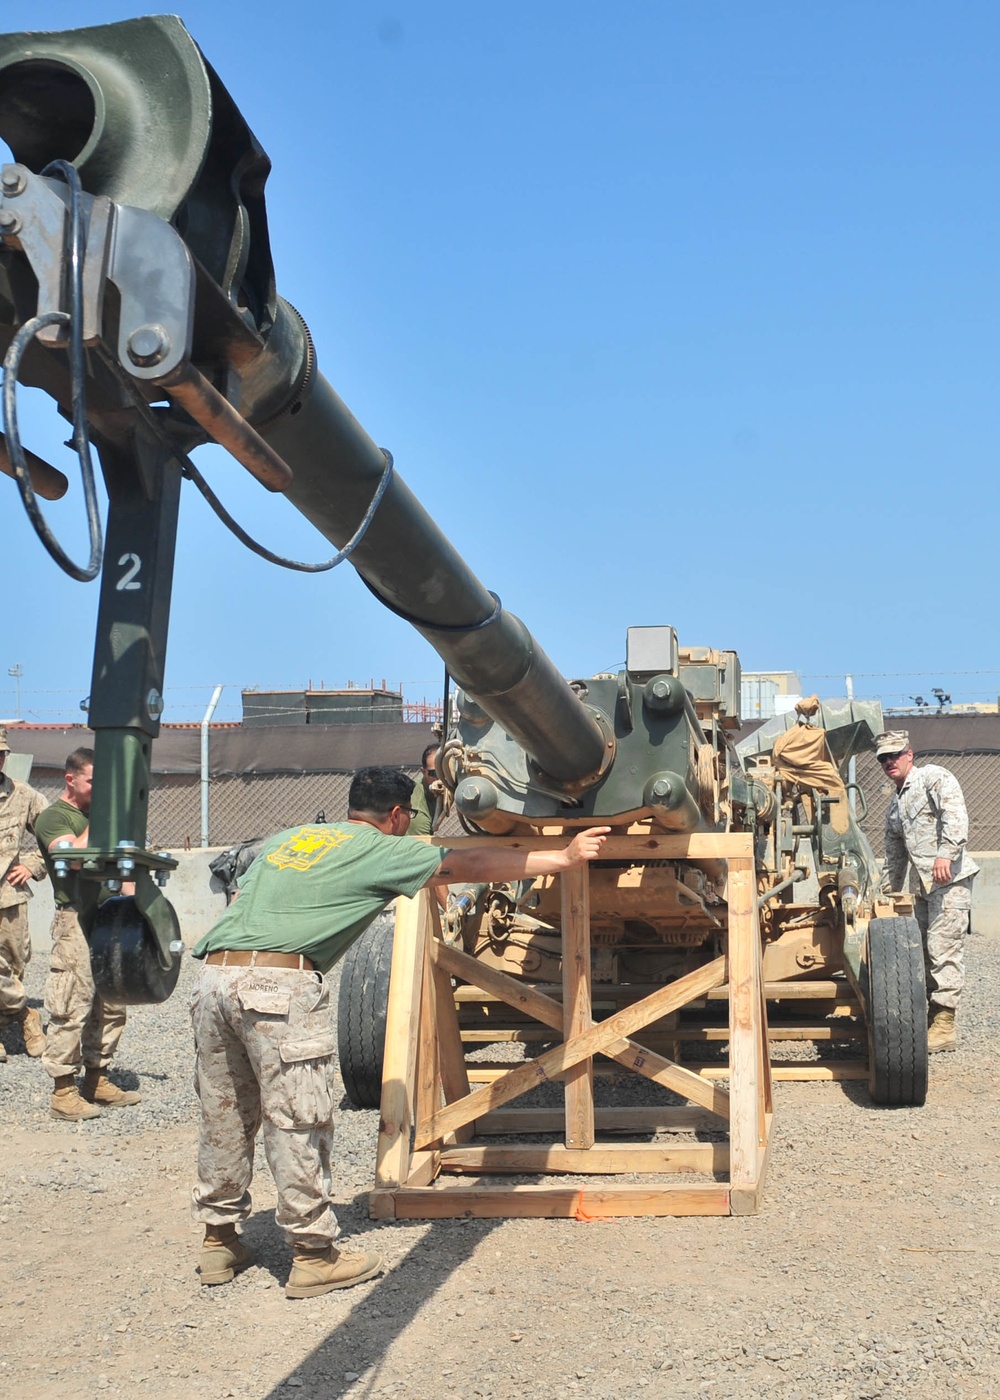 Joint project between the Combined Joint Task Force - Horn of Africa Seabees, attached to the Naval Mobile Construction Battalion 133 Detachment, and Marines with Charlie Battery, 1st Battalion, 11th Marines (1/11).